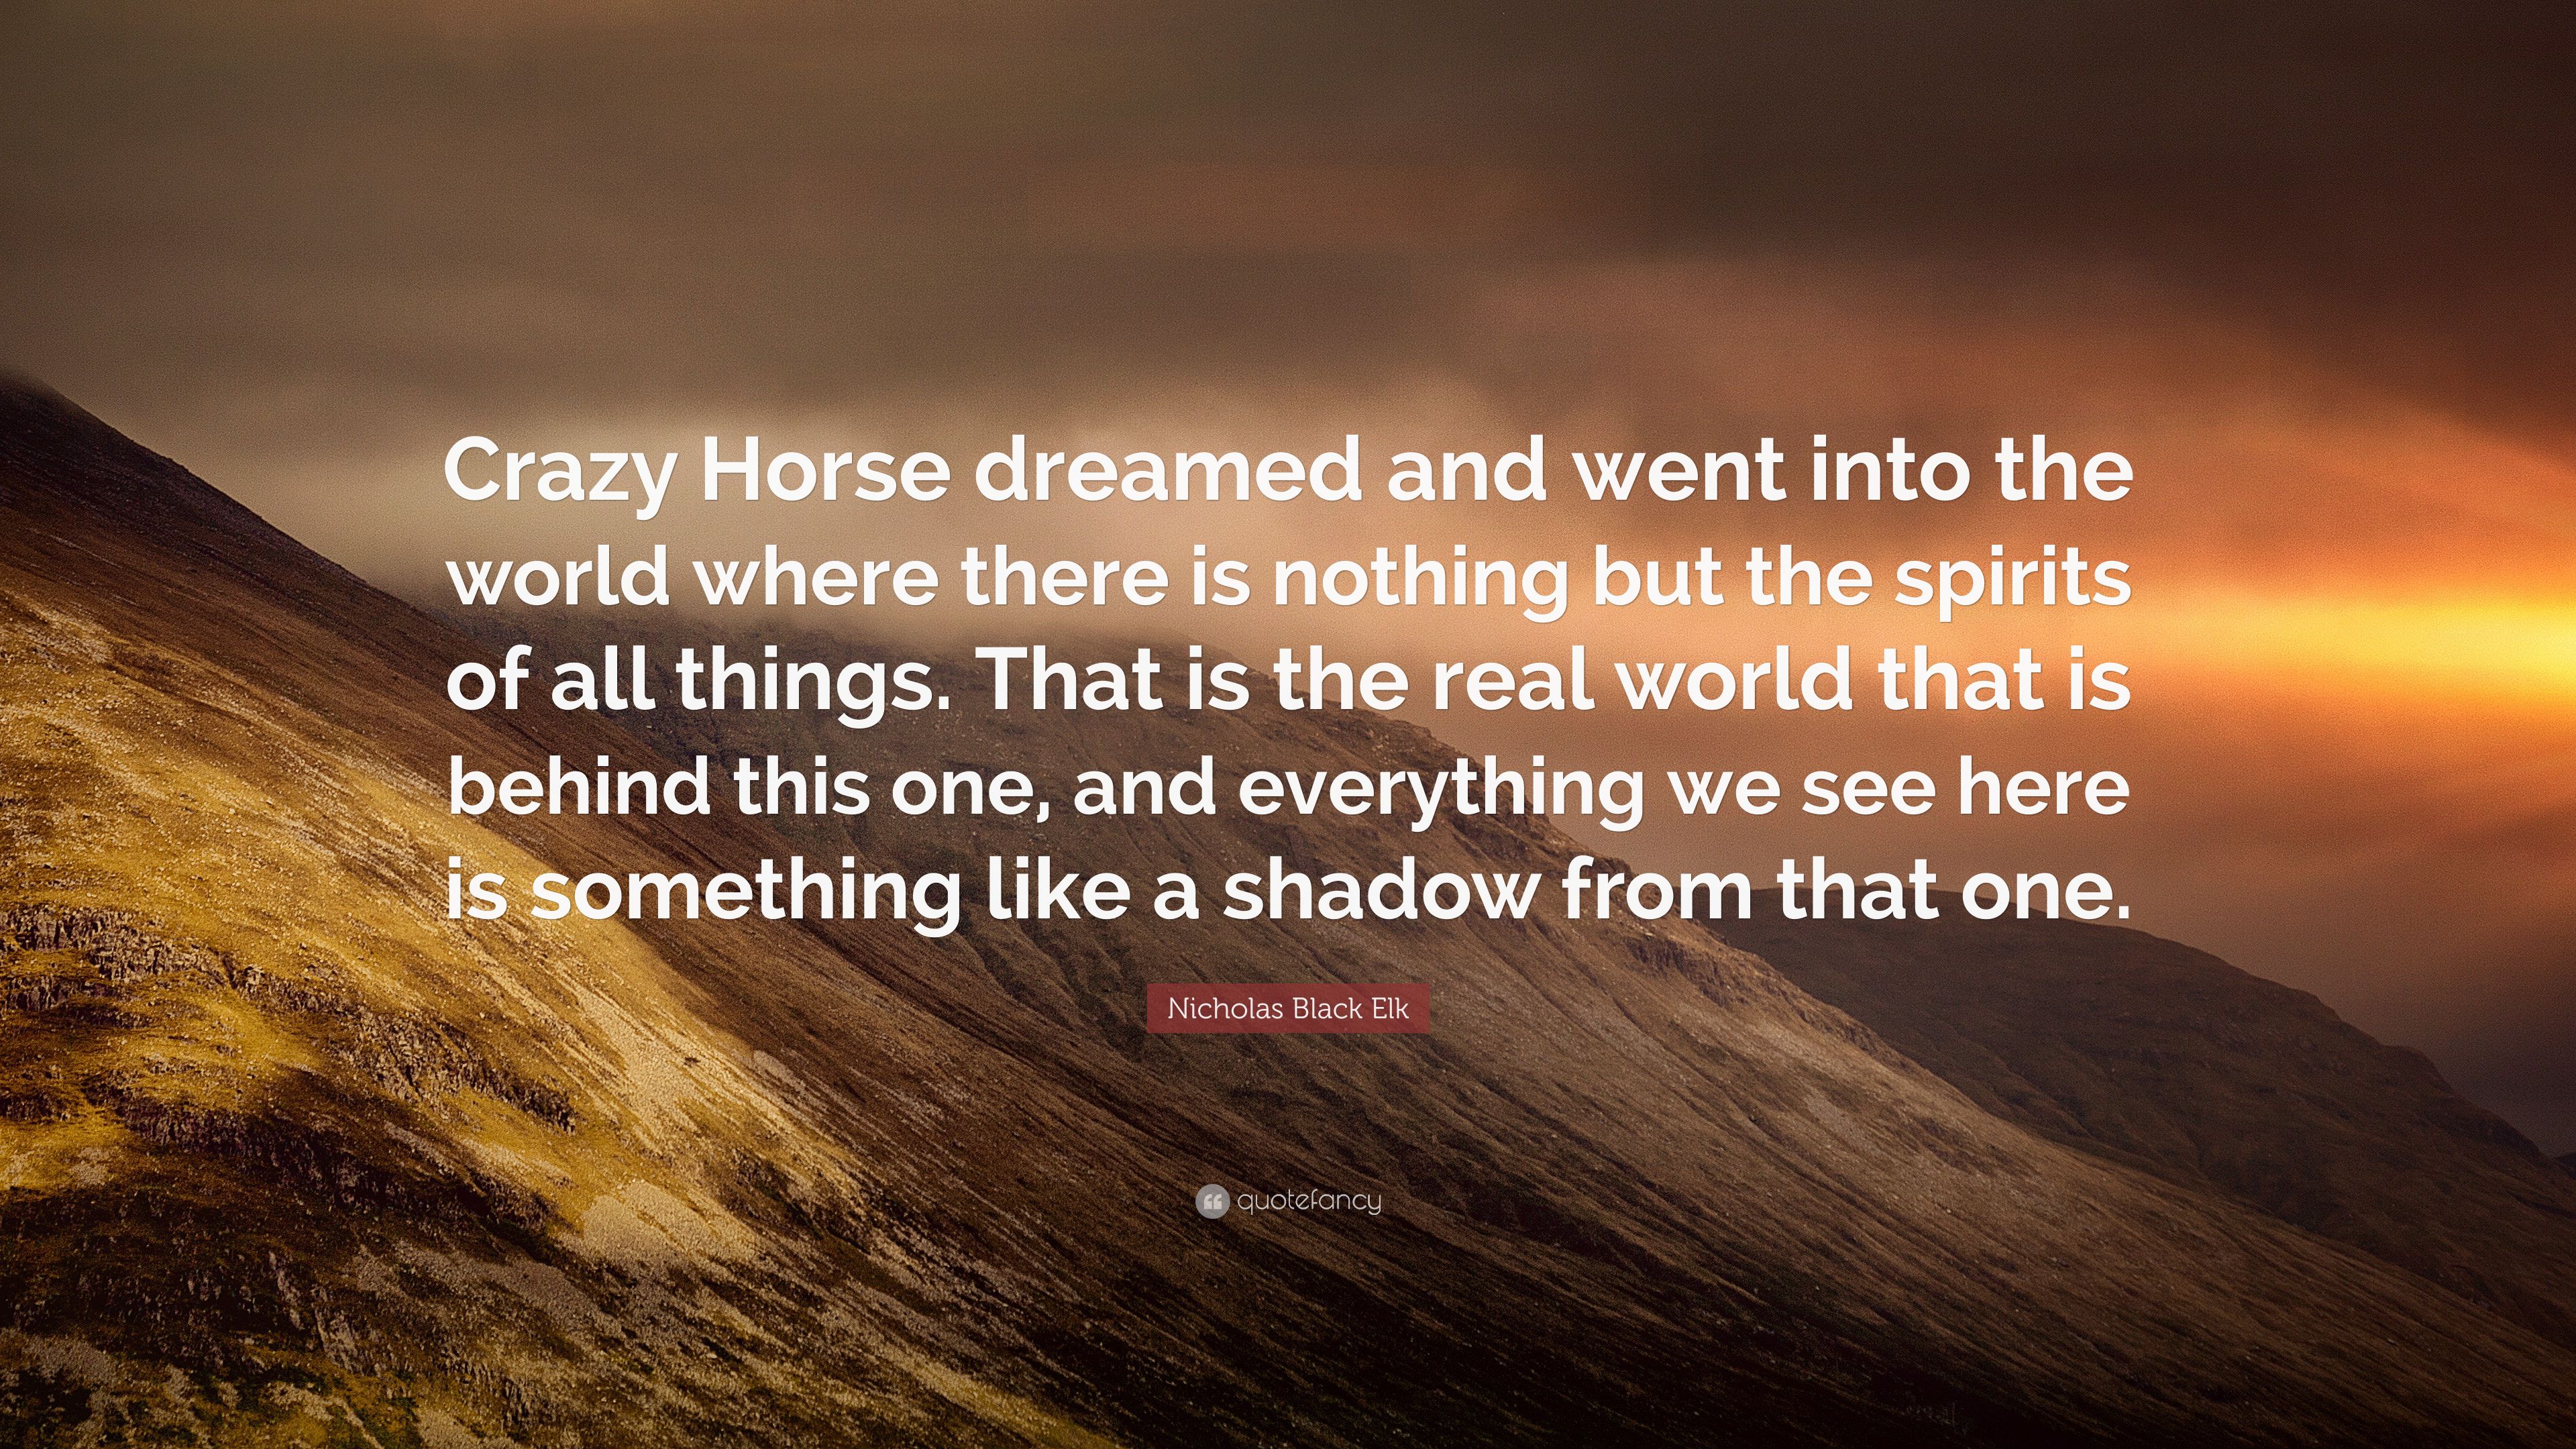 Nicholas Black Elk Quote: “Crazy Horse dreamed and went into